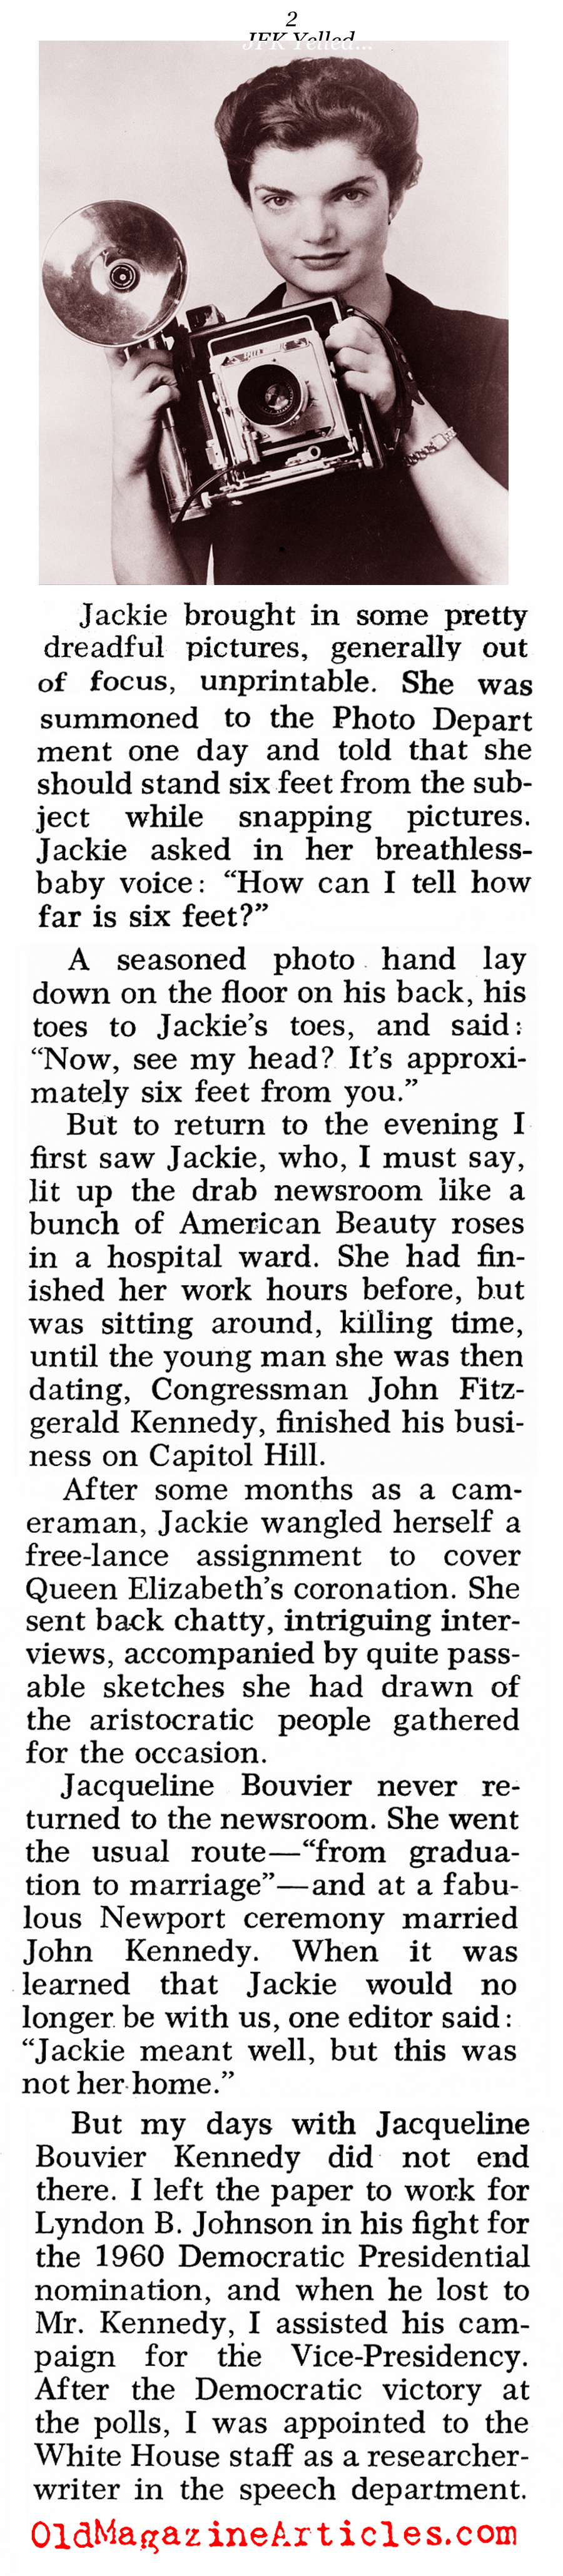 The Unknown Jackie Kennedy (Pageant Magazine, 1970)